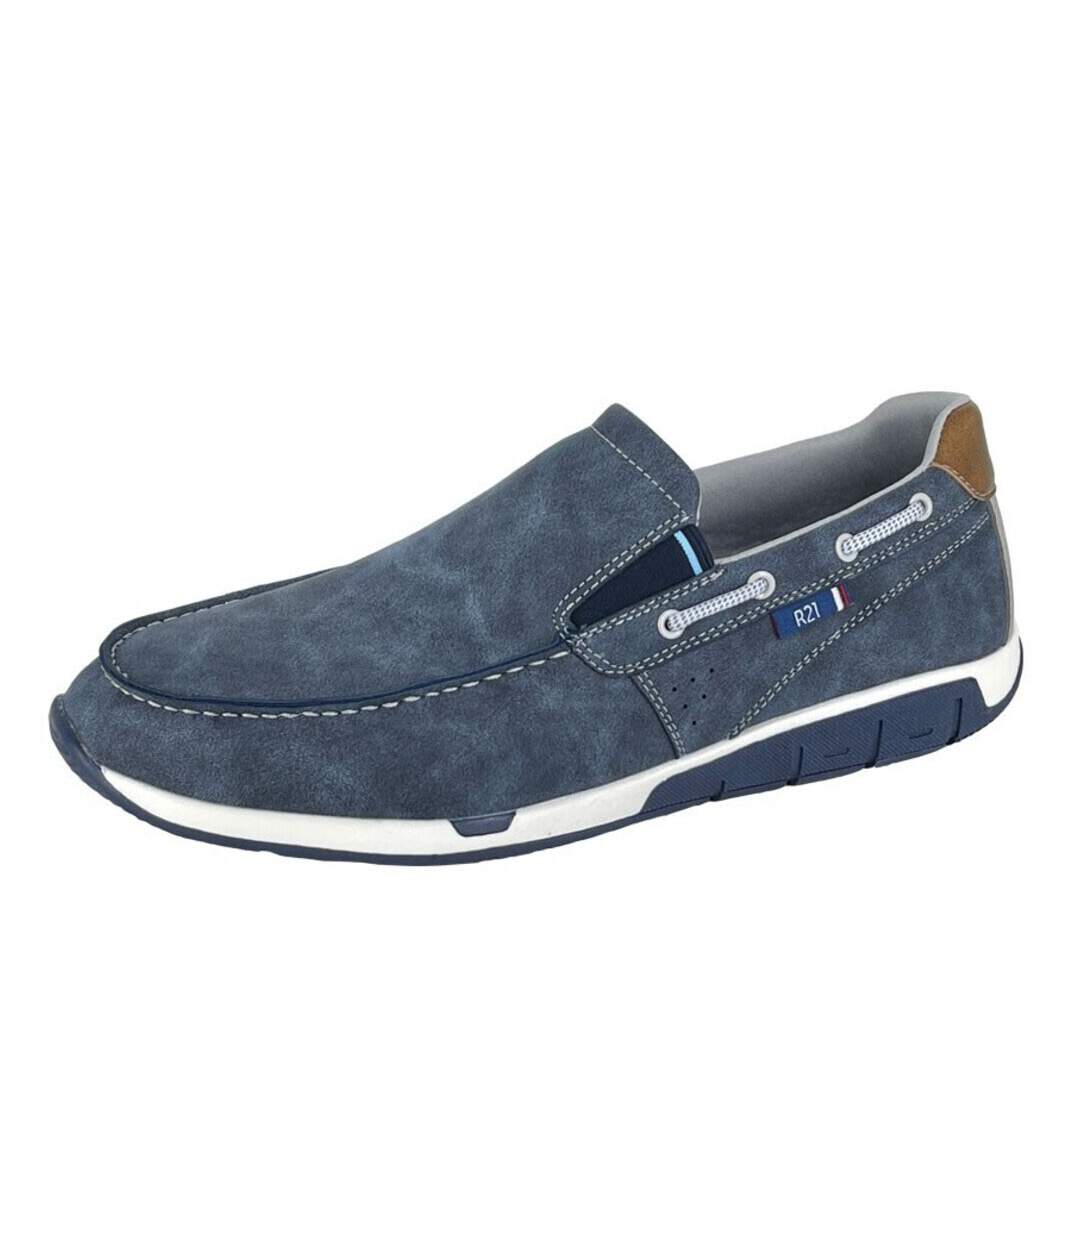 R21 Mens Boat Shoes (Navy)